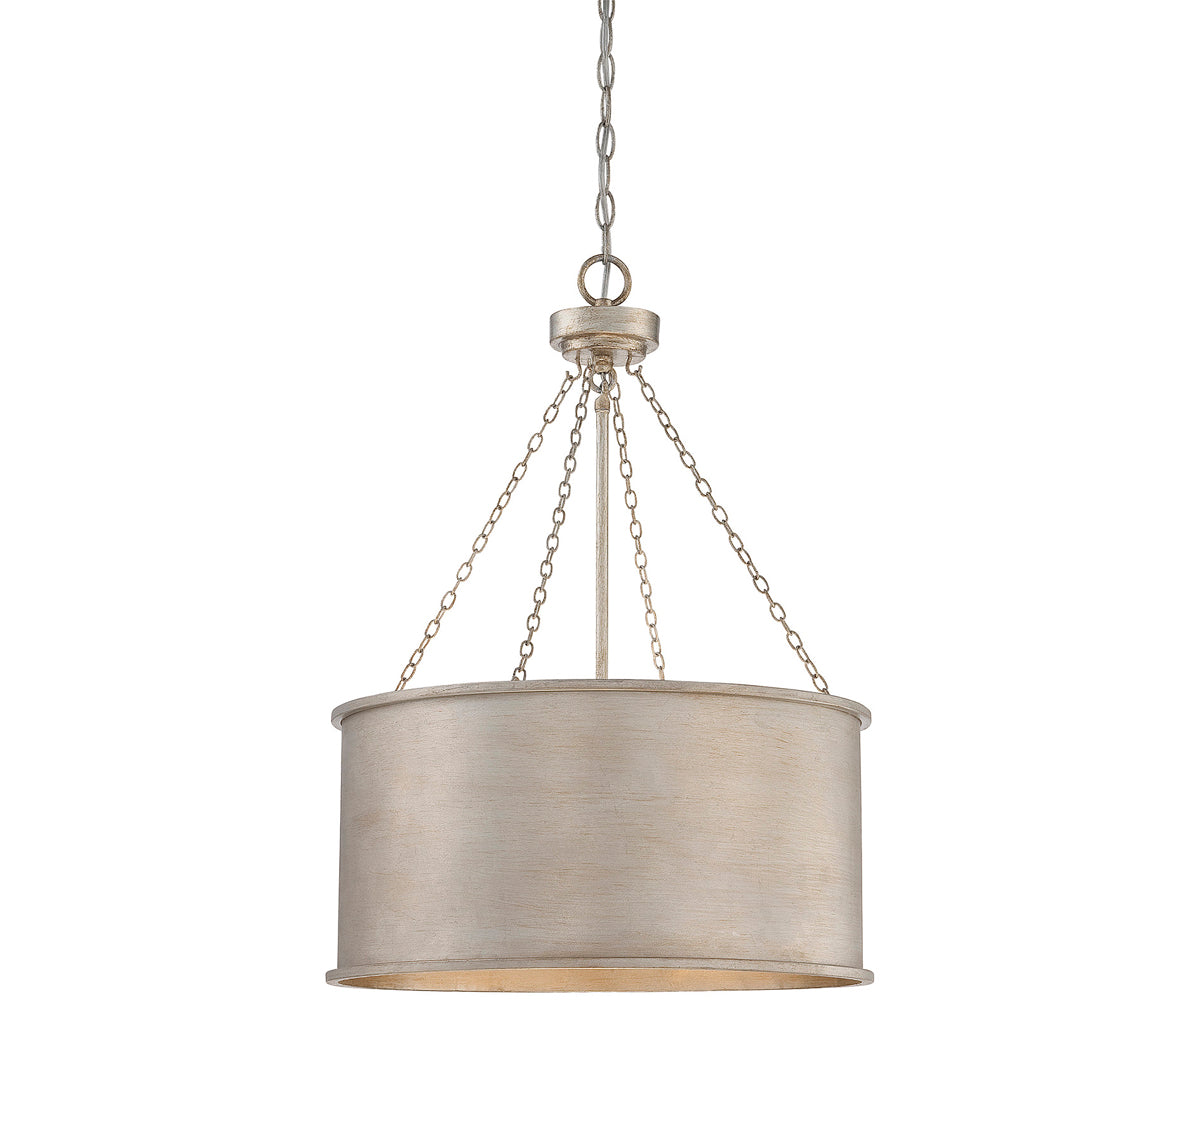 Rochester 4-Light Pendant in Silver Patina